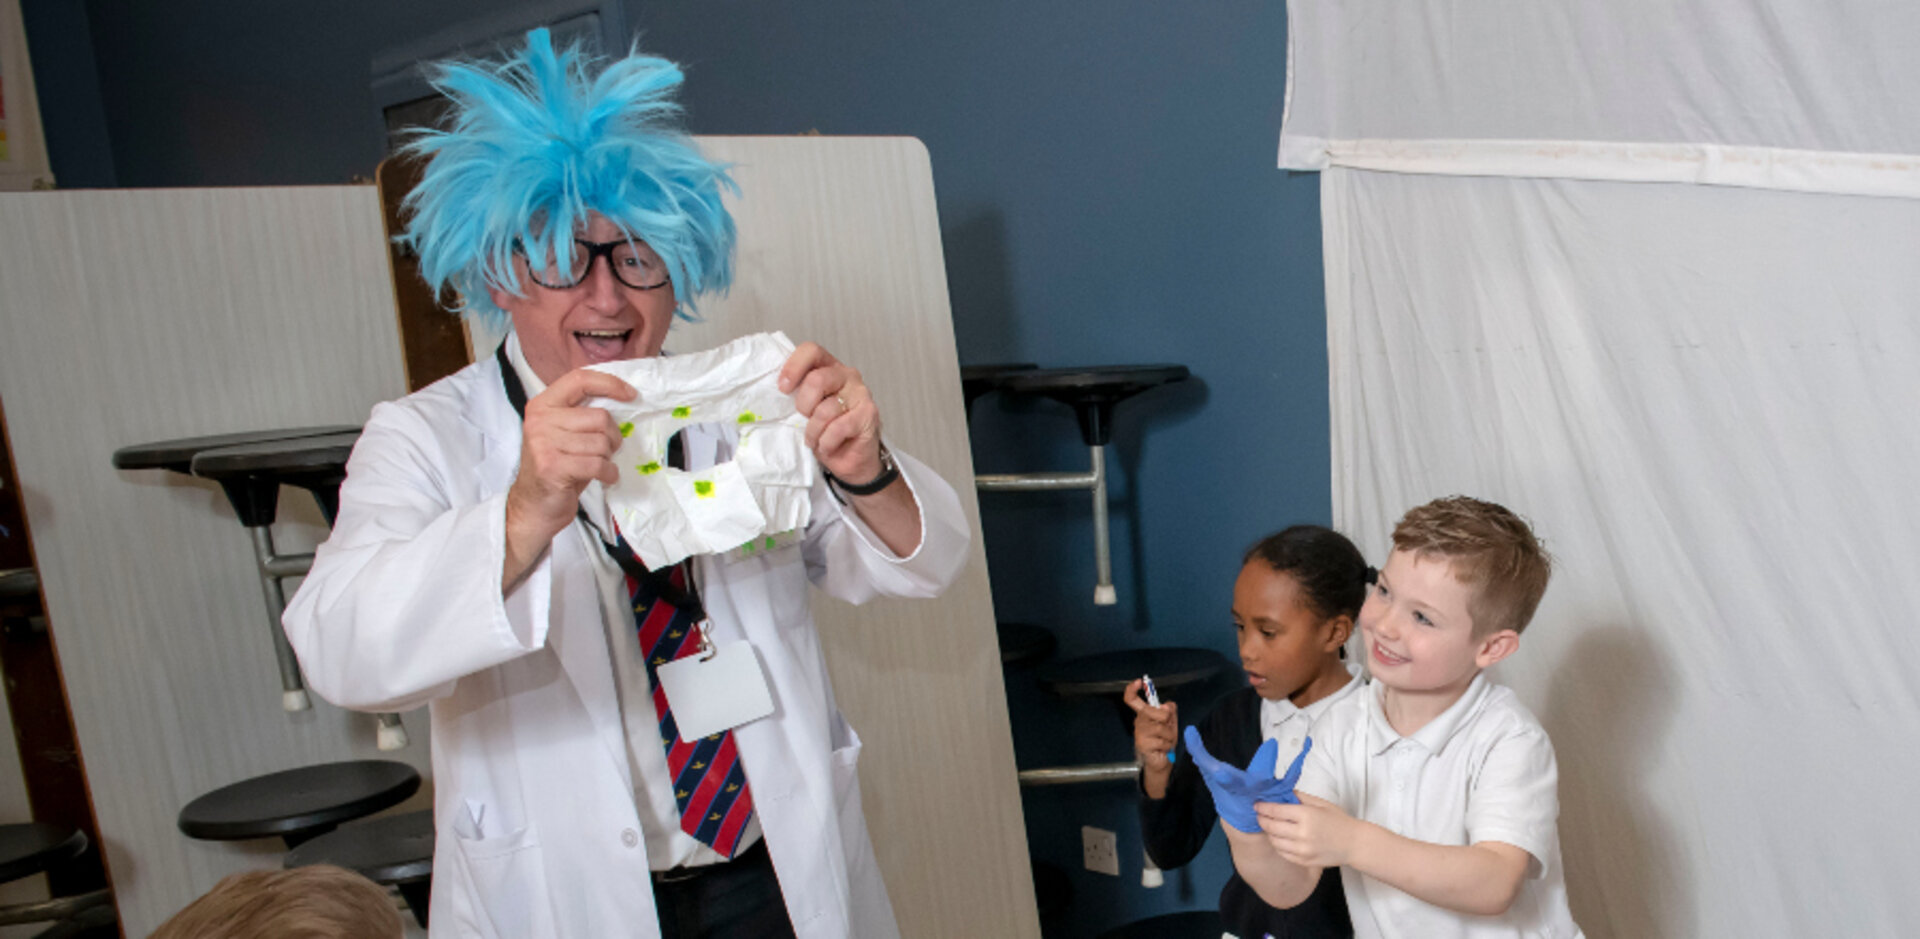 Professor Snot teaches primary pupils how to stop the spread of infection with fun lessons